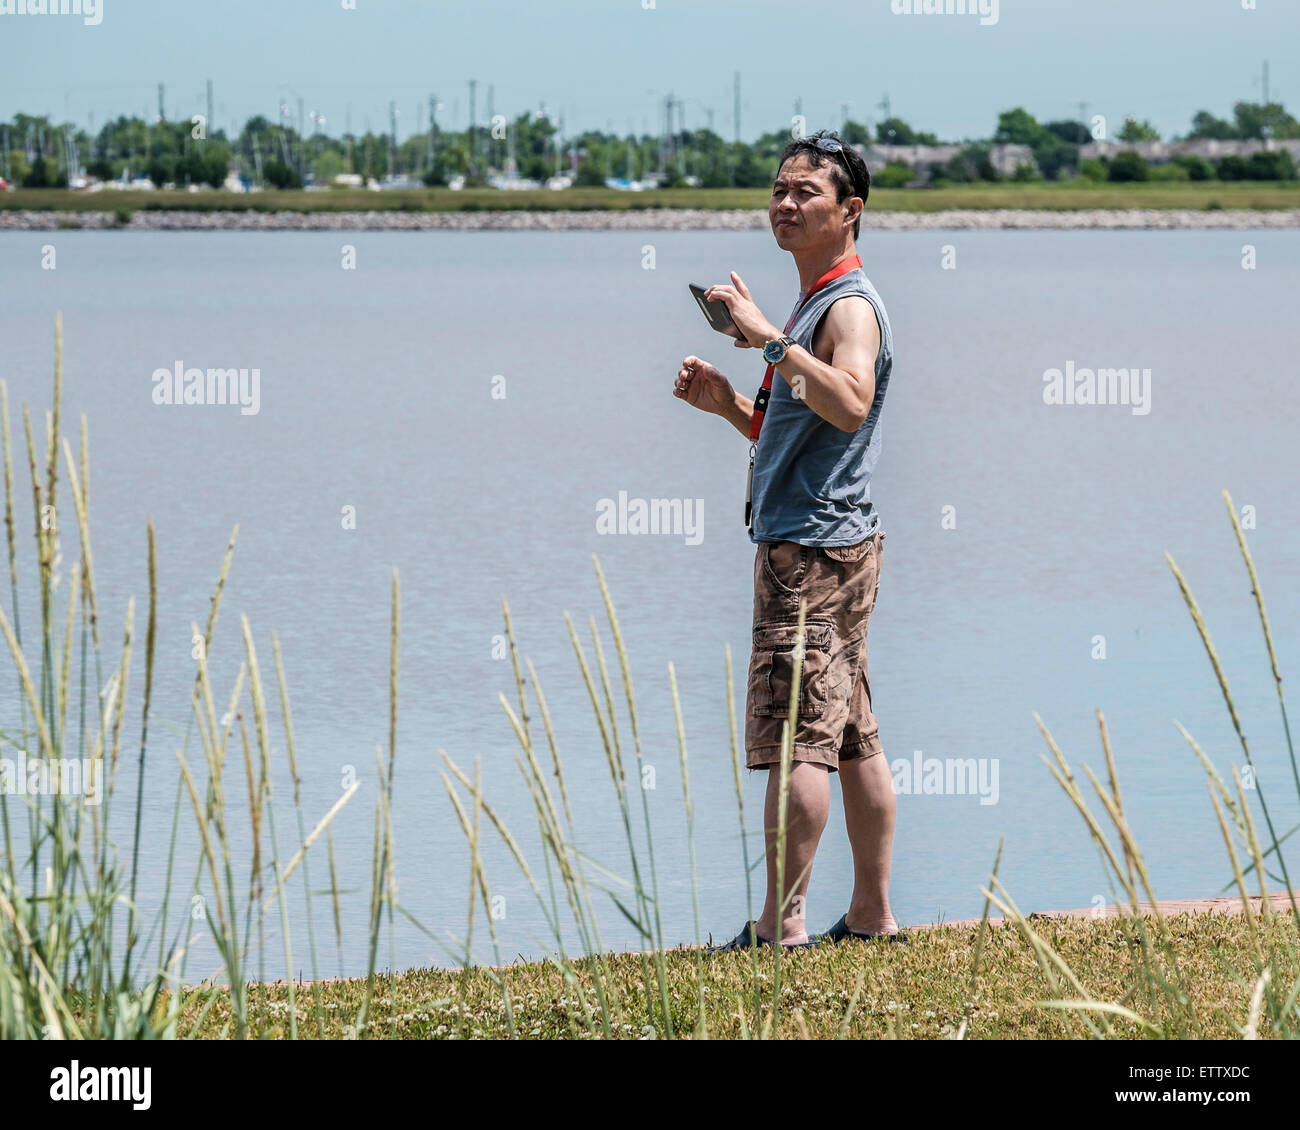 A 50 year old Asian man takes pictures with his cellular phone at Lake Hefner in Oklahoma City, Oklahoma, USA. Stock Photo